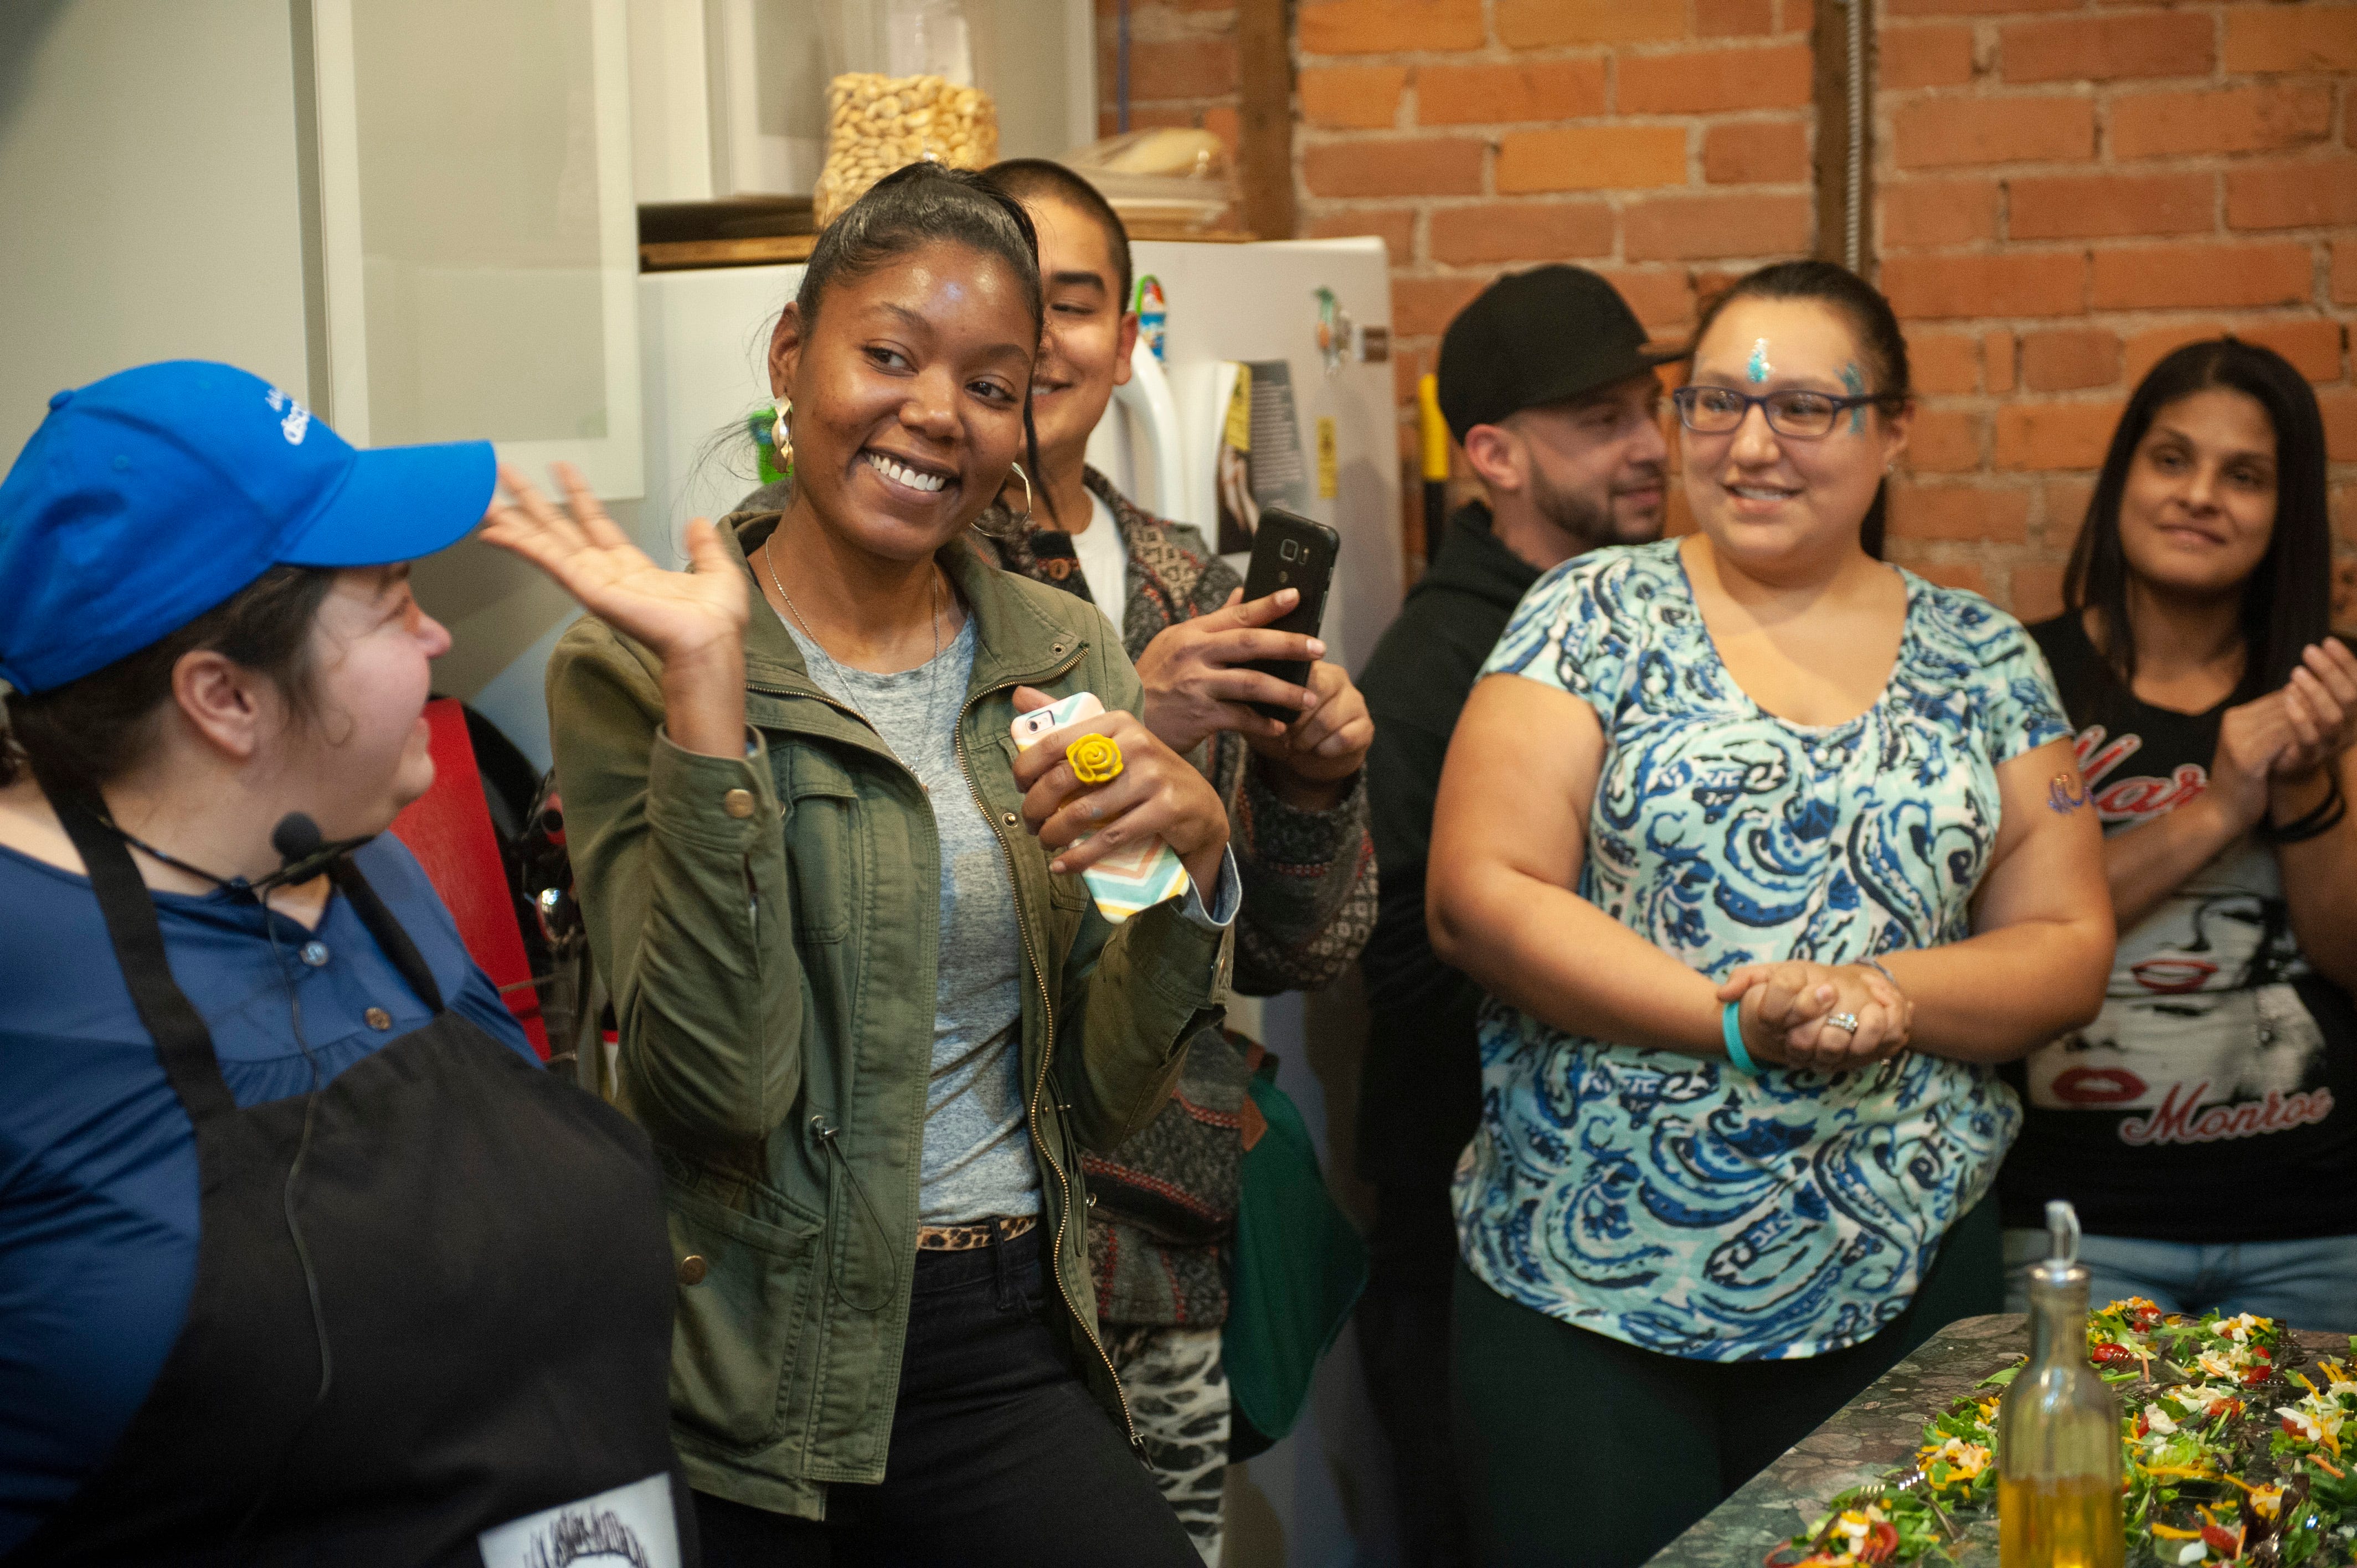 Cannabis entrepreneur Adrienne Benson of AB Blooms in Ypsilanti waves to party guests as she is introduced at the beginning of "The Art of Cannabis" tasting and art exhibition.